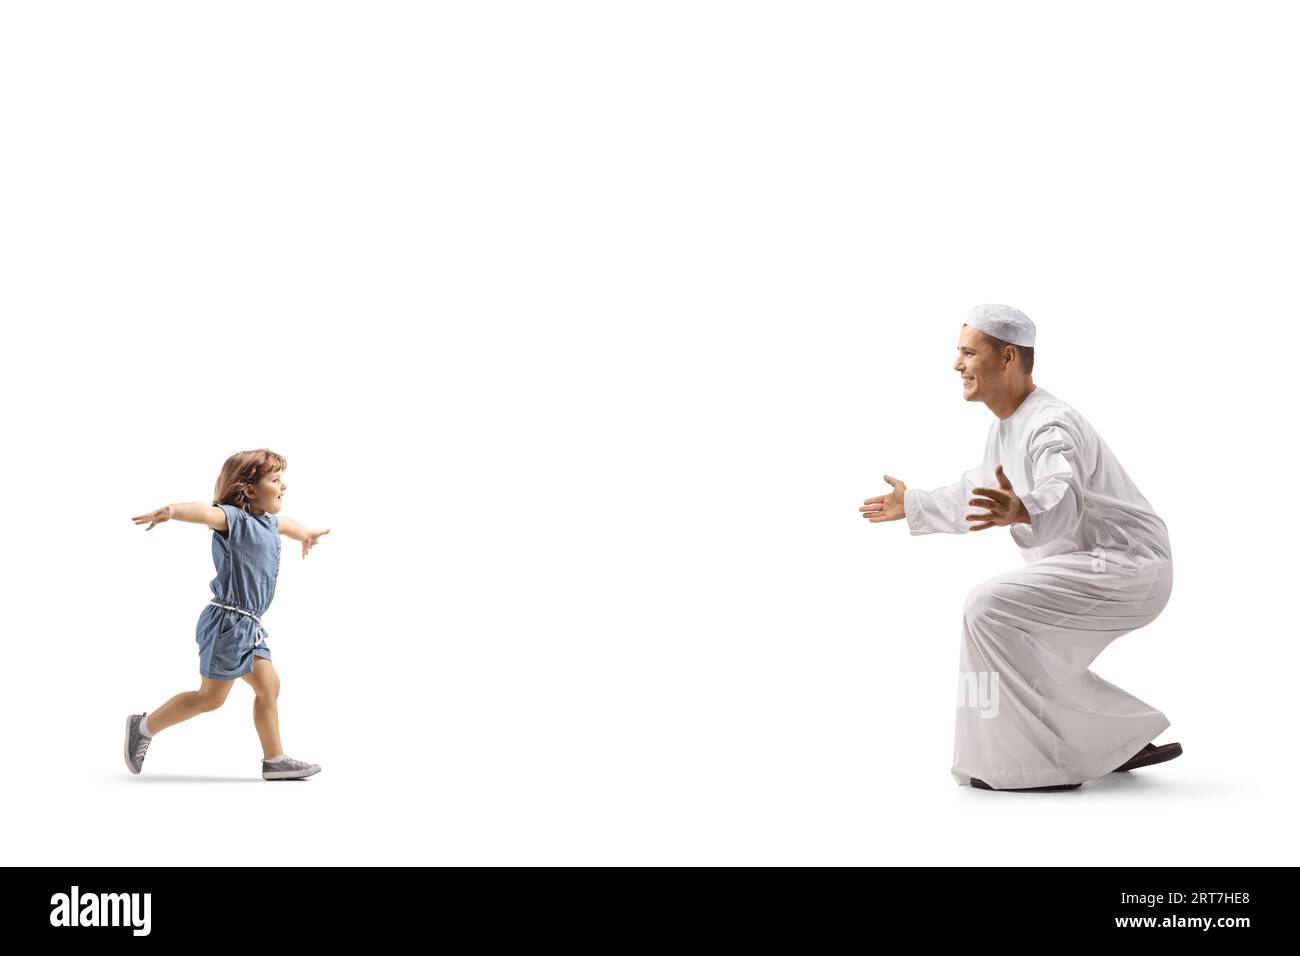 Little girl running to hug a man in traditional muslim clothes isolated on white background Stock Photo